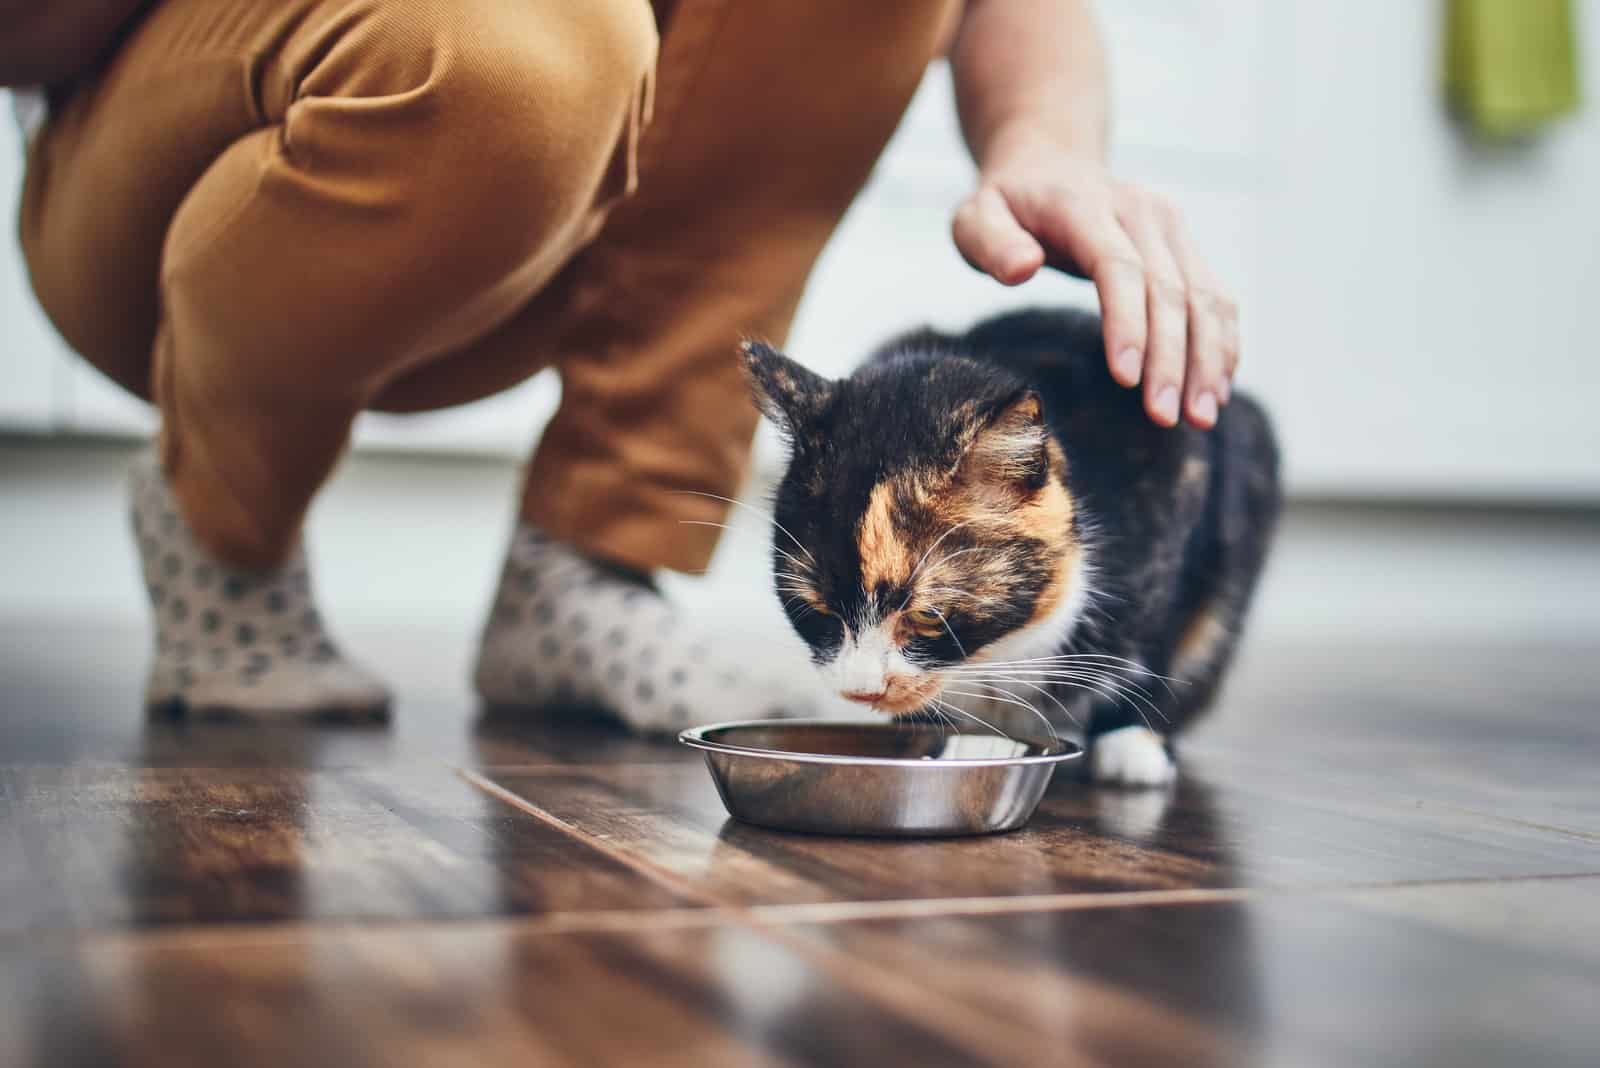 Cute cat eating from bowl at home kitchen